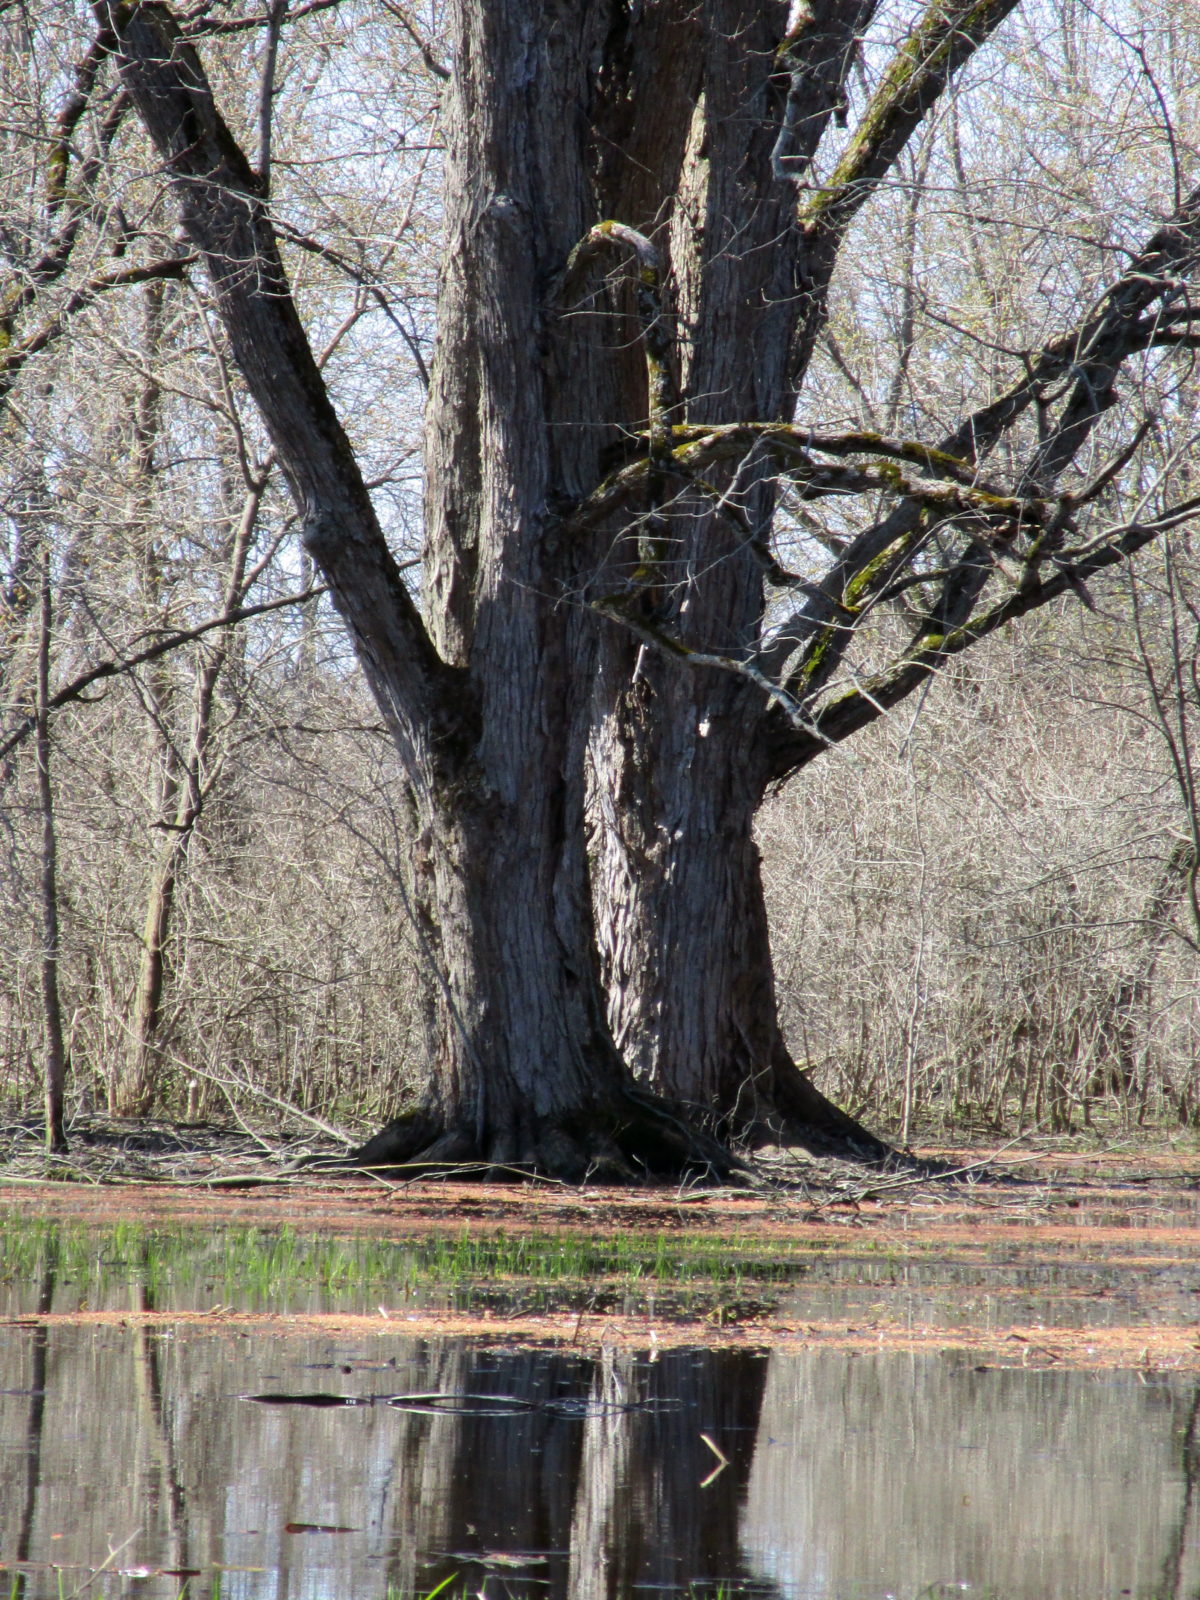 A large silver maple tree stands in the floodplain of the Jock River.